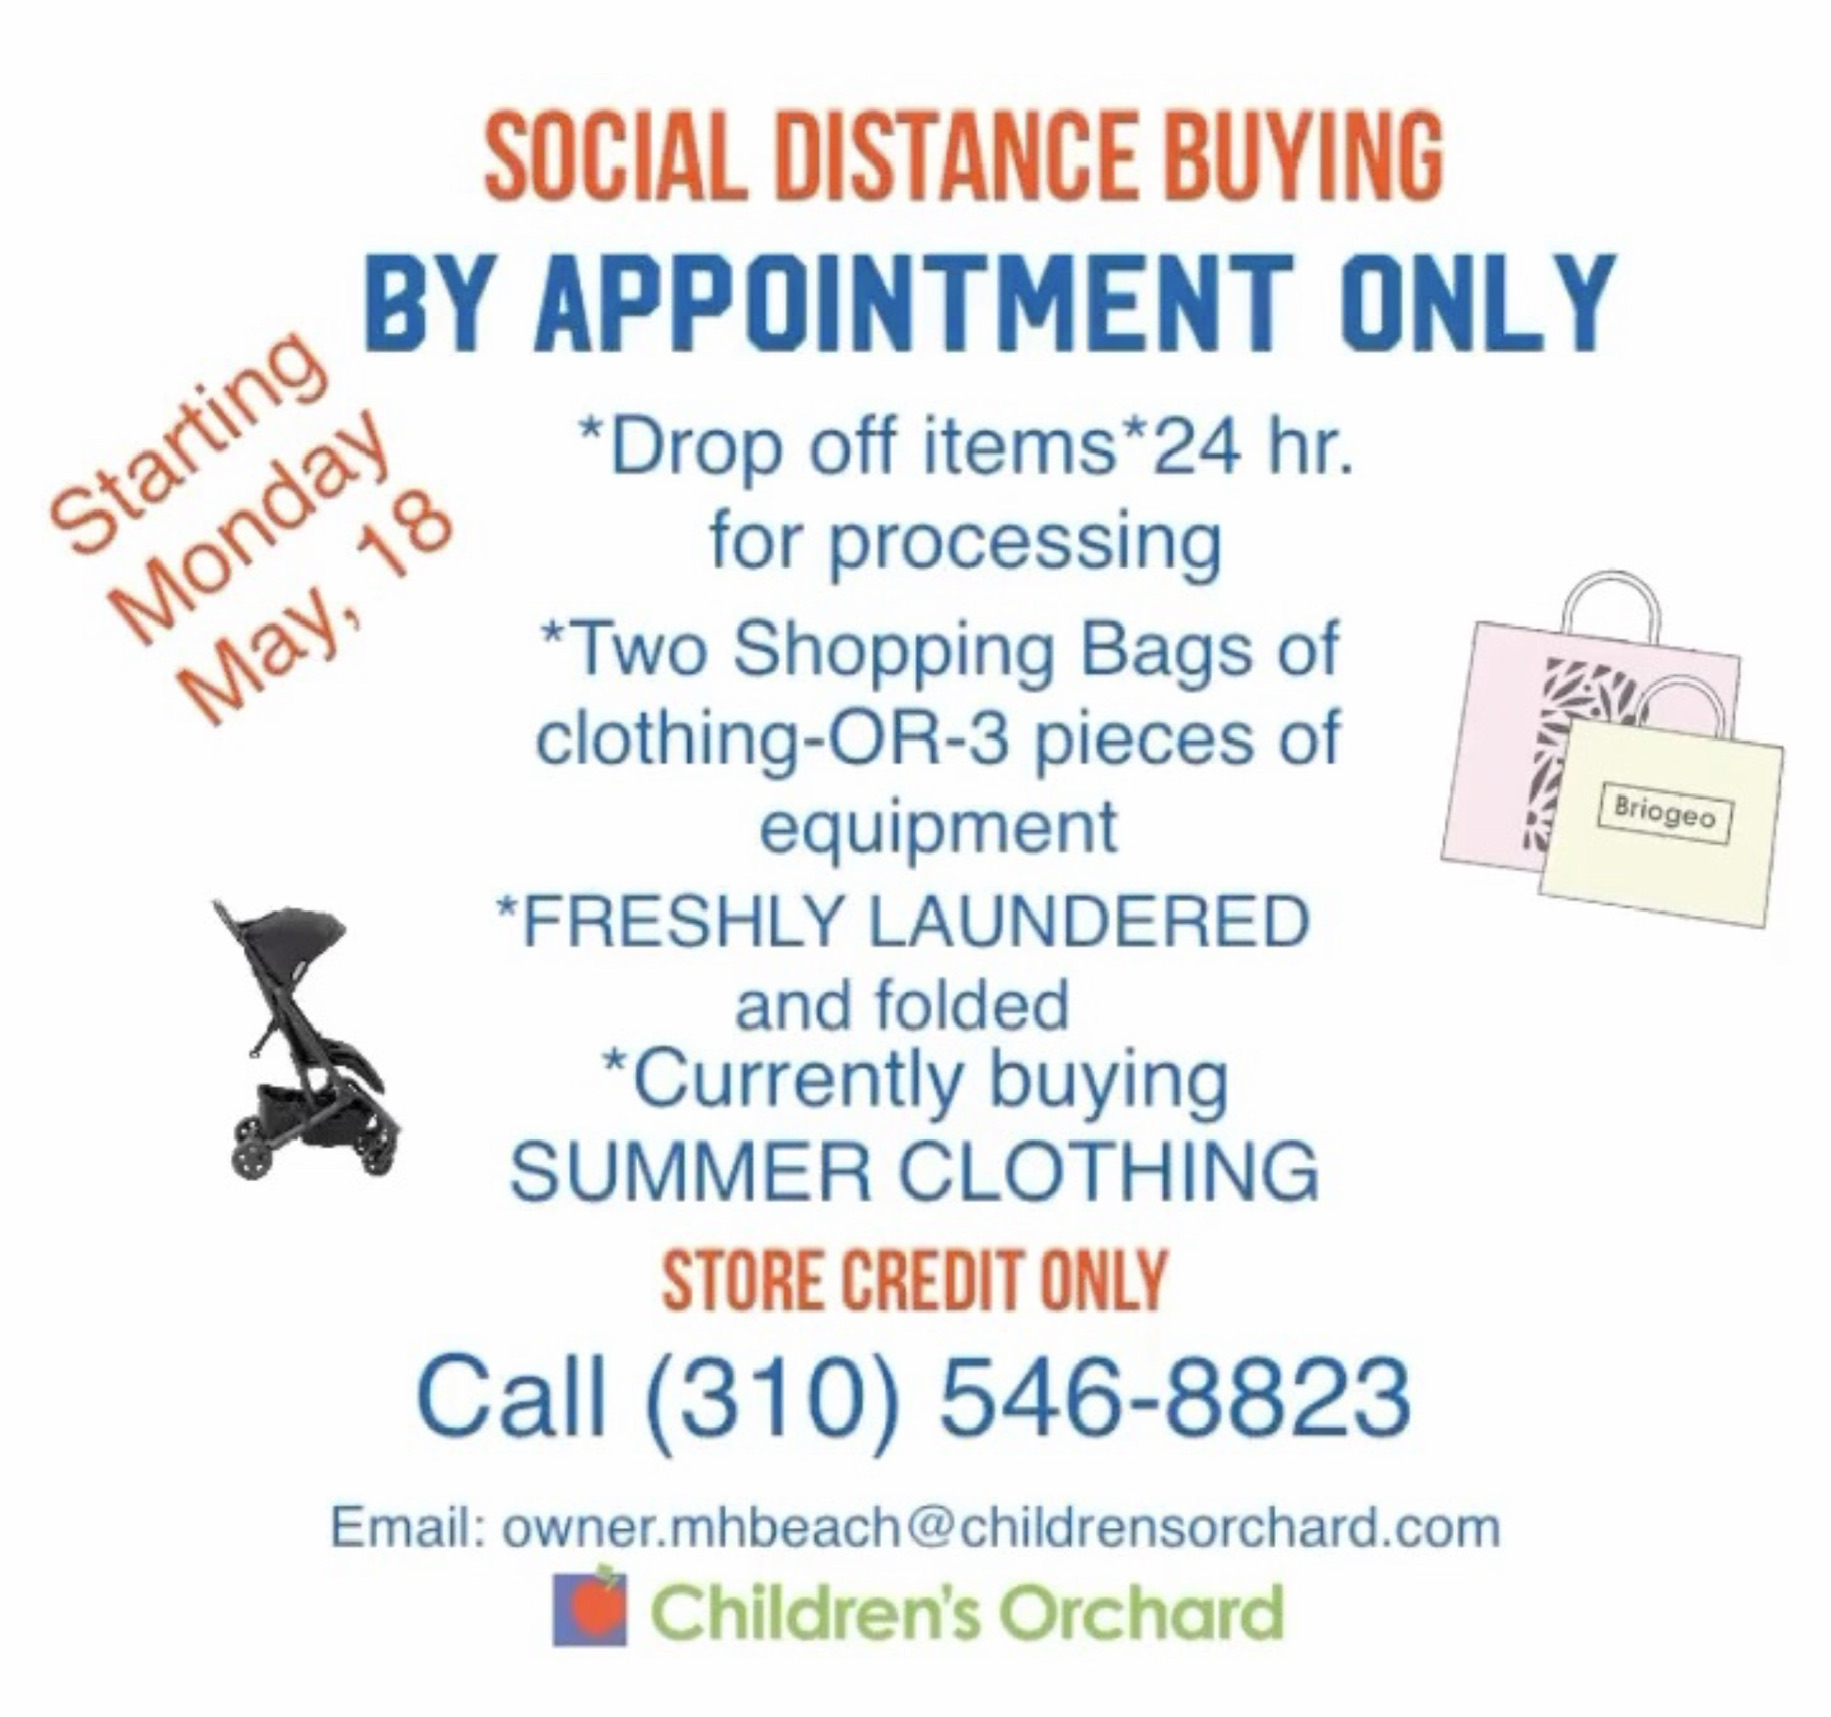 Starting Monday, May 18: Social distance buying by appointment only. *Drop off items* 24 hour for processing. *Two shopping bags of clothing or 3 pieces of equipment. *Freshly laundered and folded. *Currently buying summer clothing. Store credit only. Call (310) 546-8823. Email: owner.mhbeach@childrensorchard.com